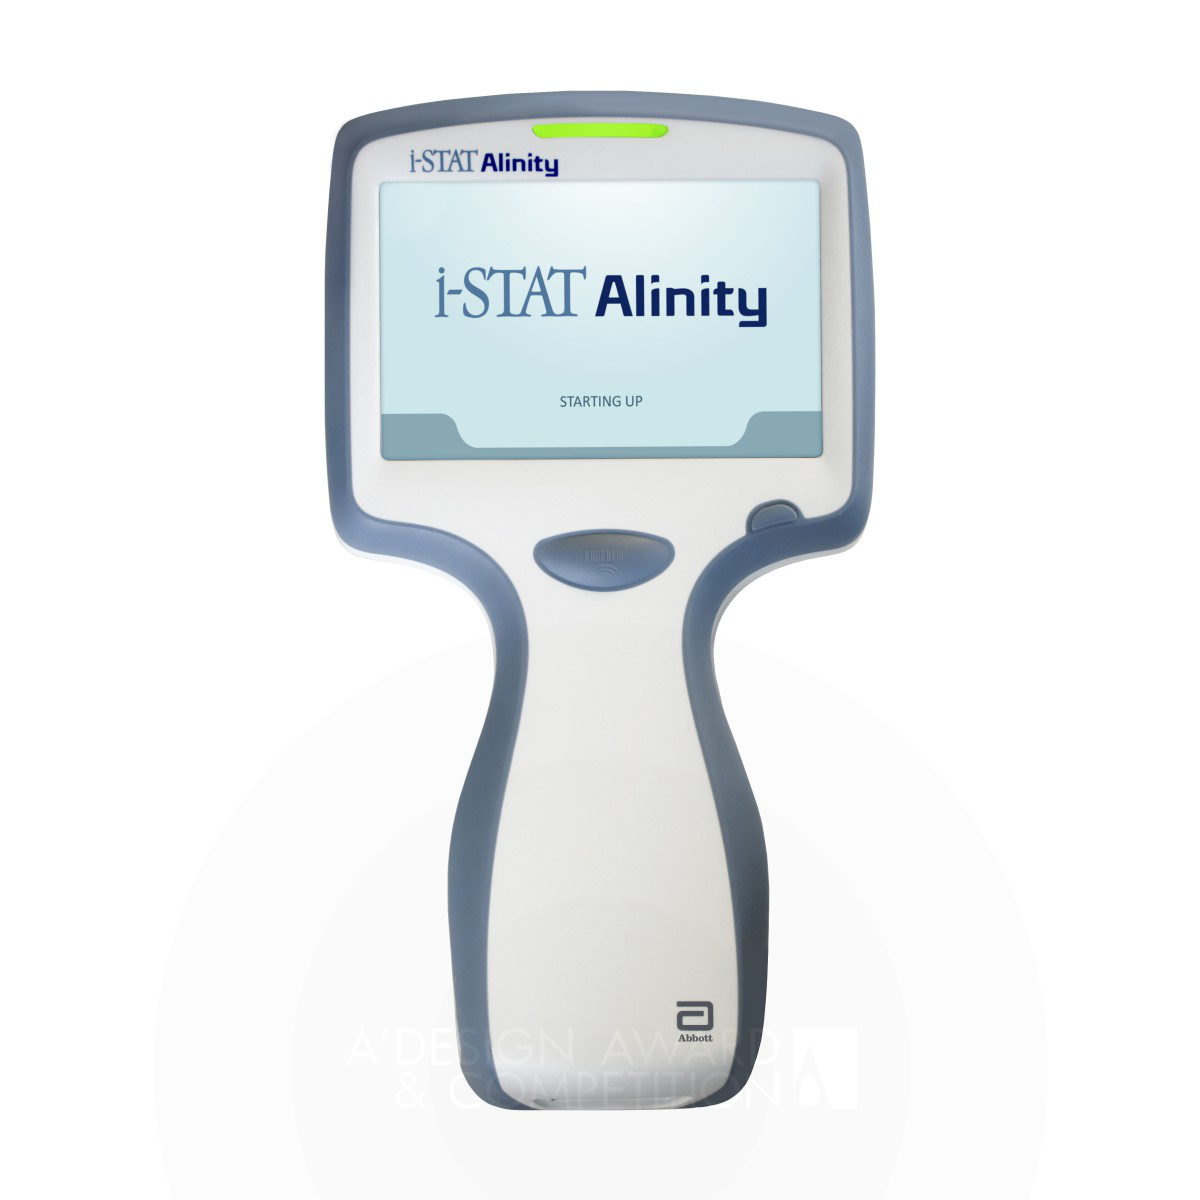 Abbott Point of Care Testing Device 